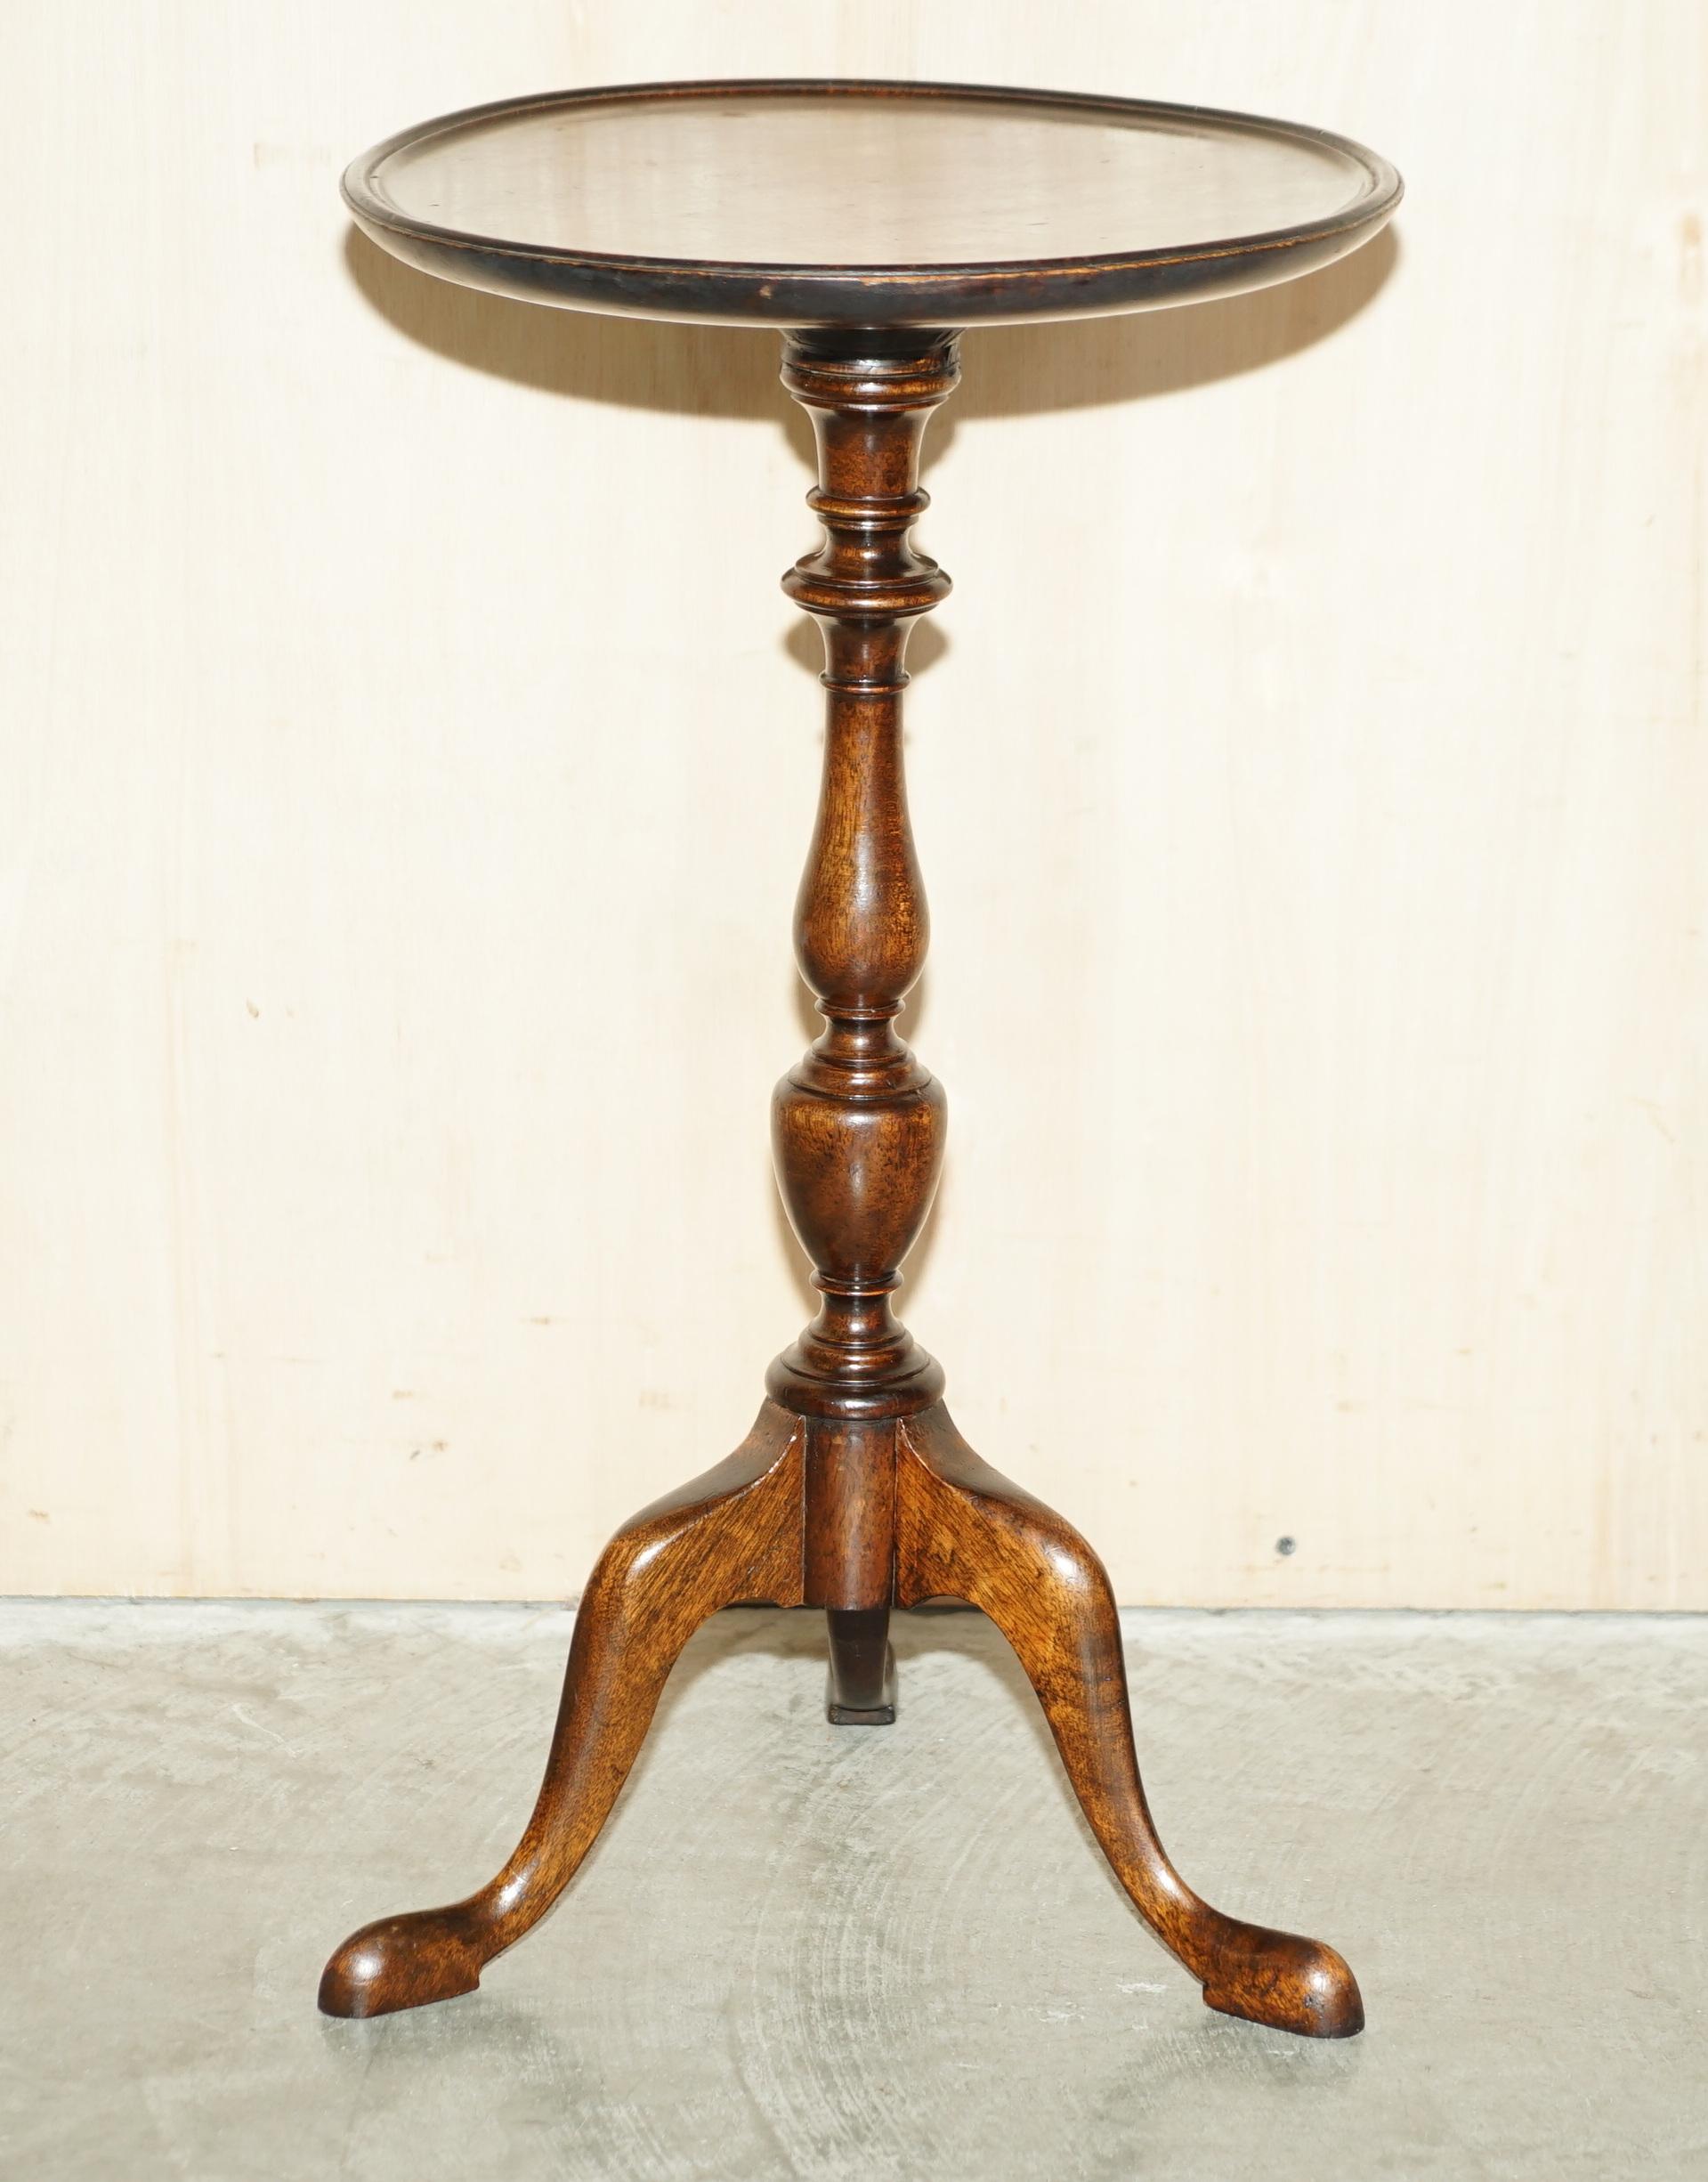 We are delighted to offer for sale this vintage Mahogany lamp or side table with nicely turned column base.

A good-looking well-made tripod, we have cleaned waxed and polished it from top to bottom, there will be normal patina marks from honest